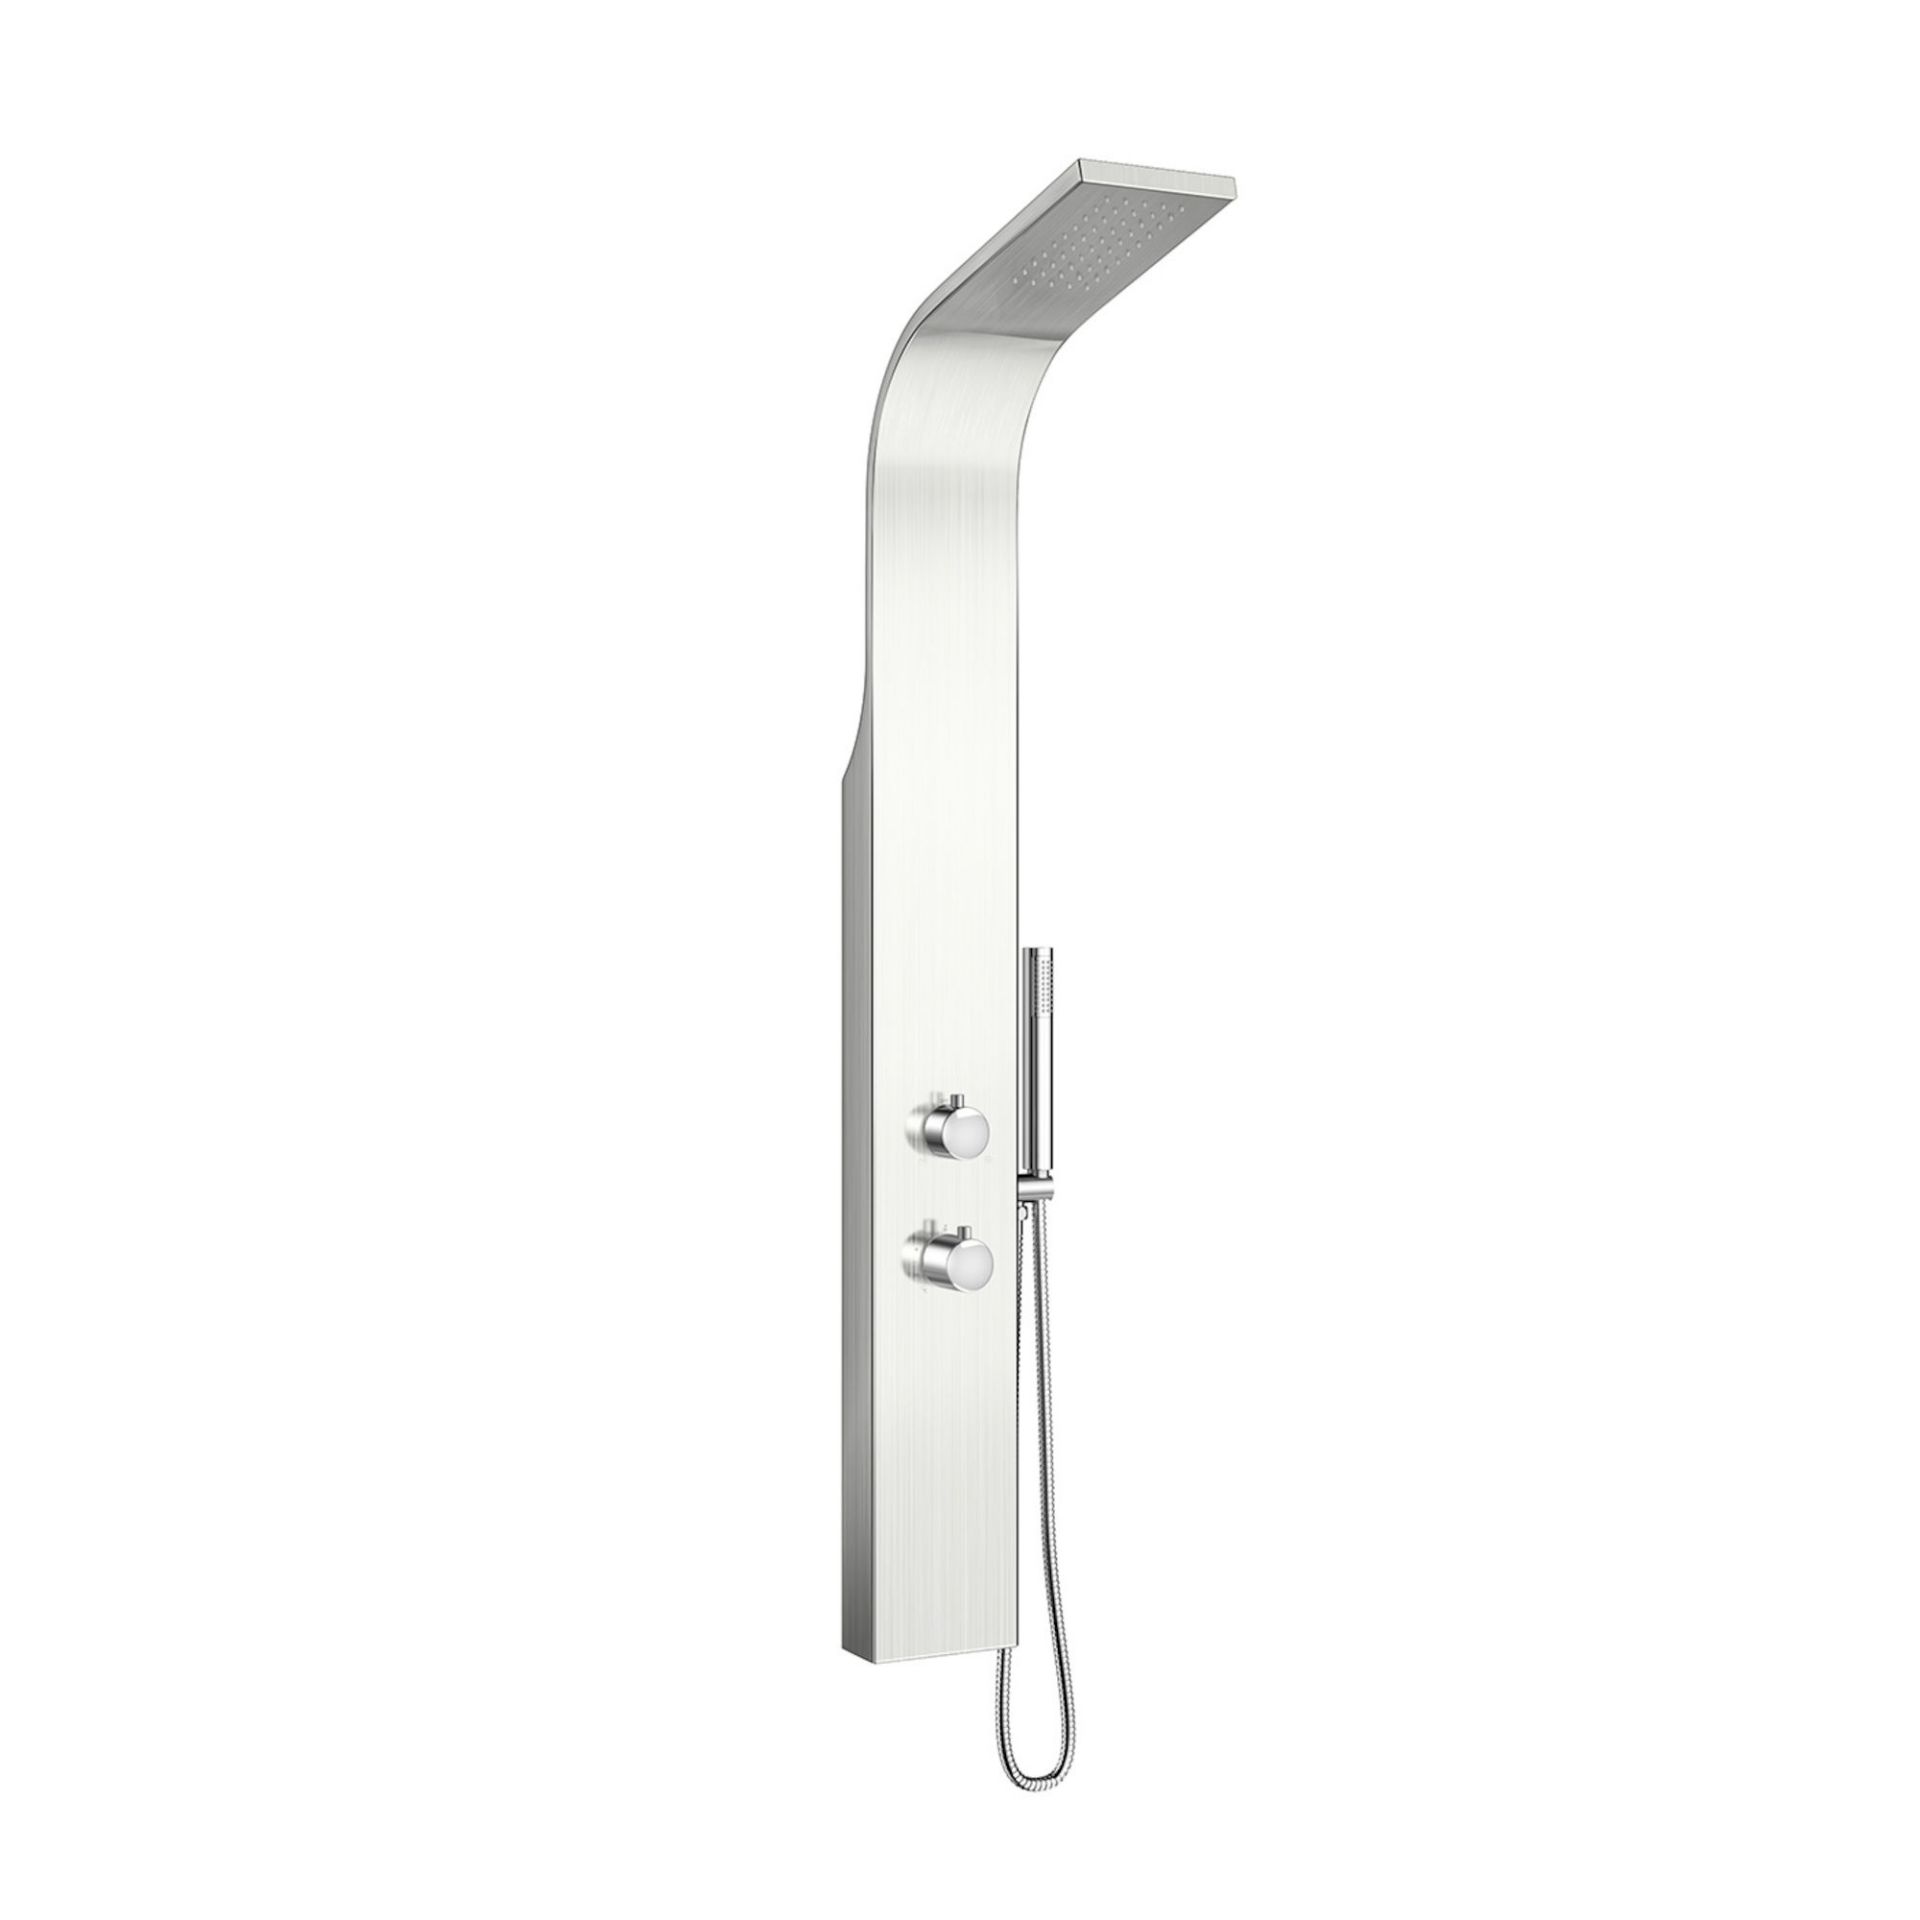 (TT2) Exposed Panel Brushed Steel Shower Tower & Handheld. Feel inspired with this contempora... - Image 4 of 4